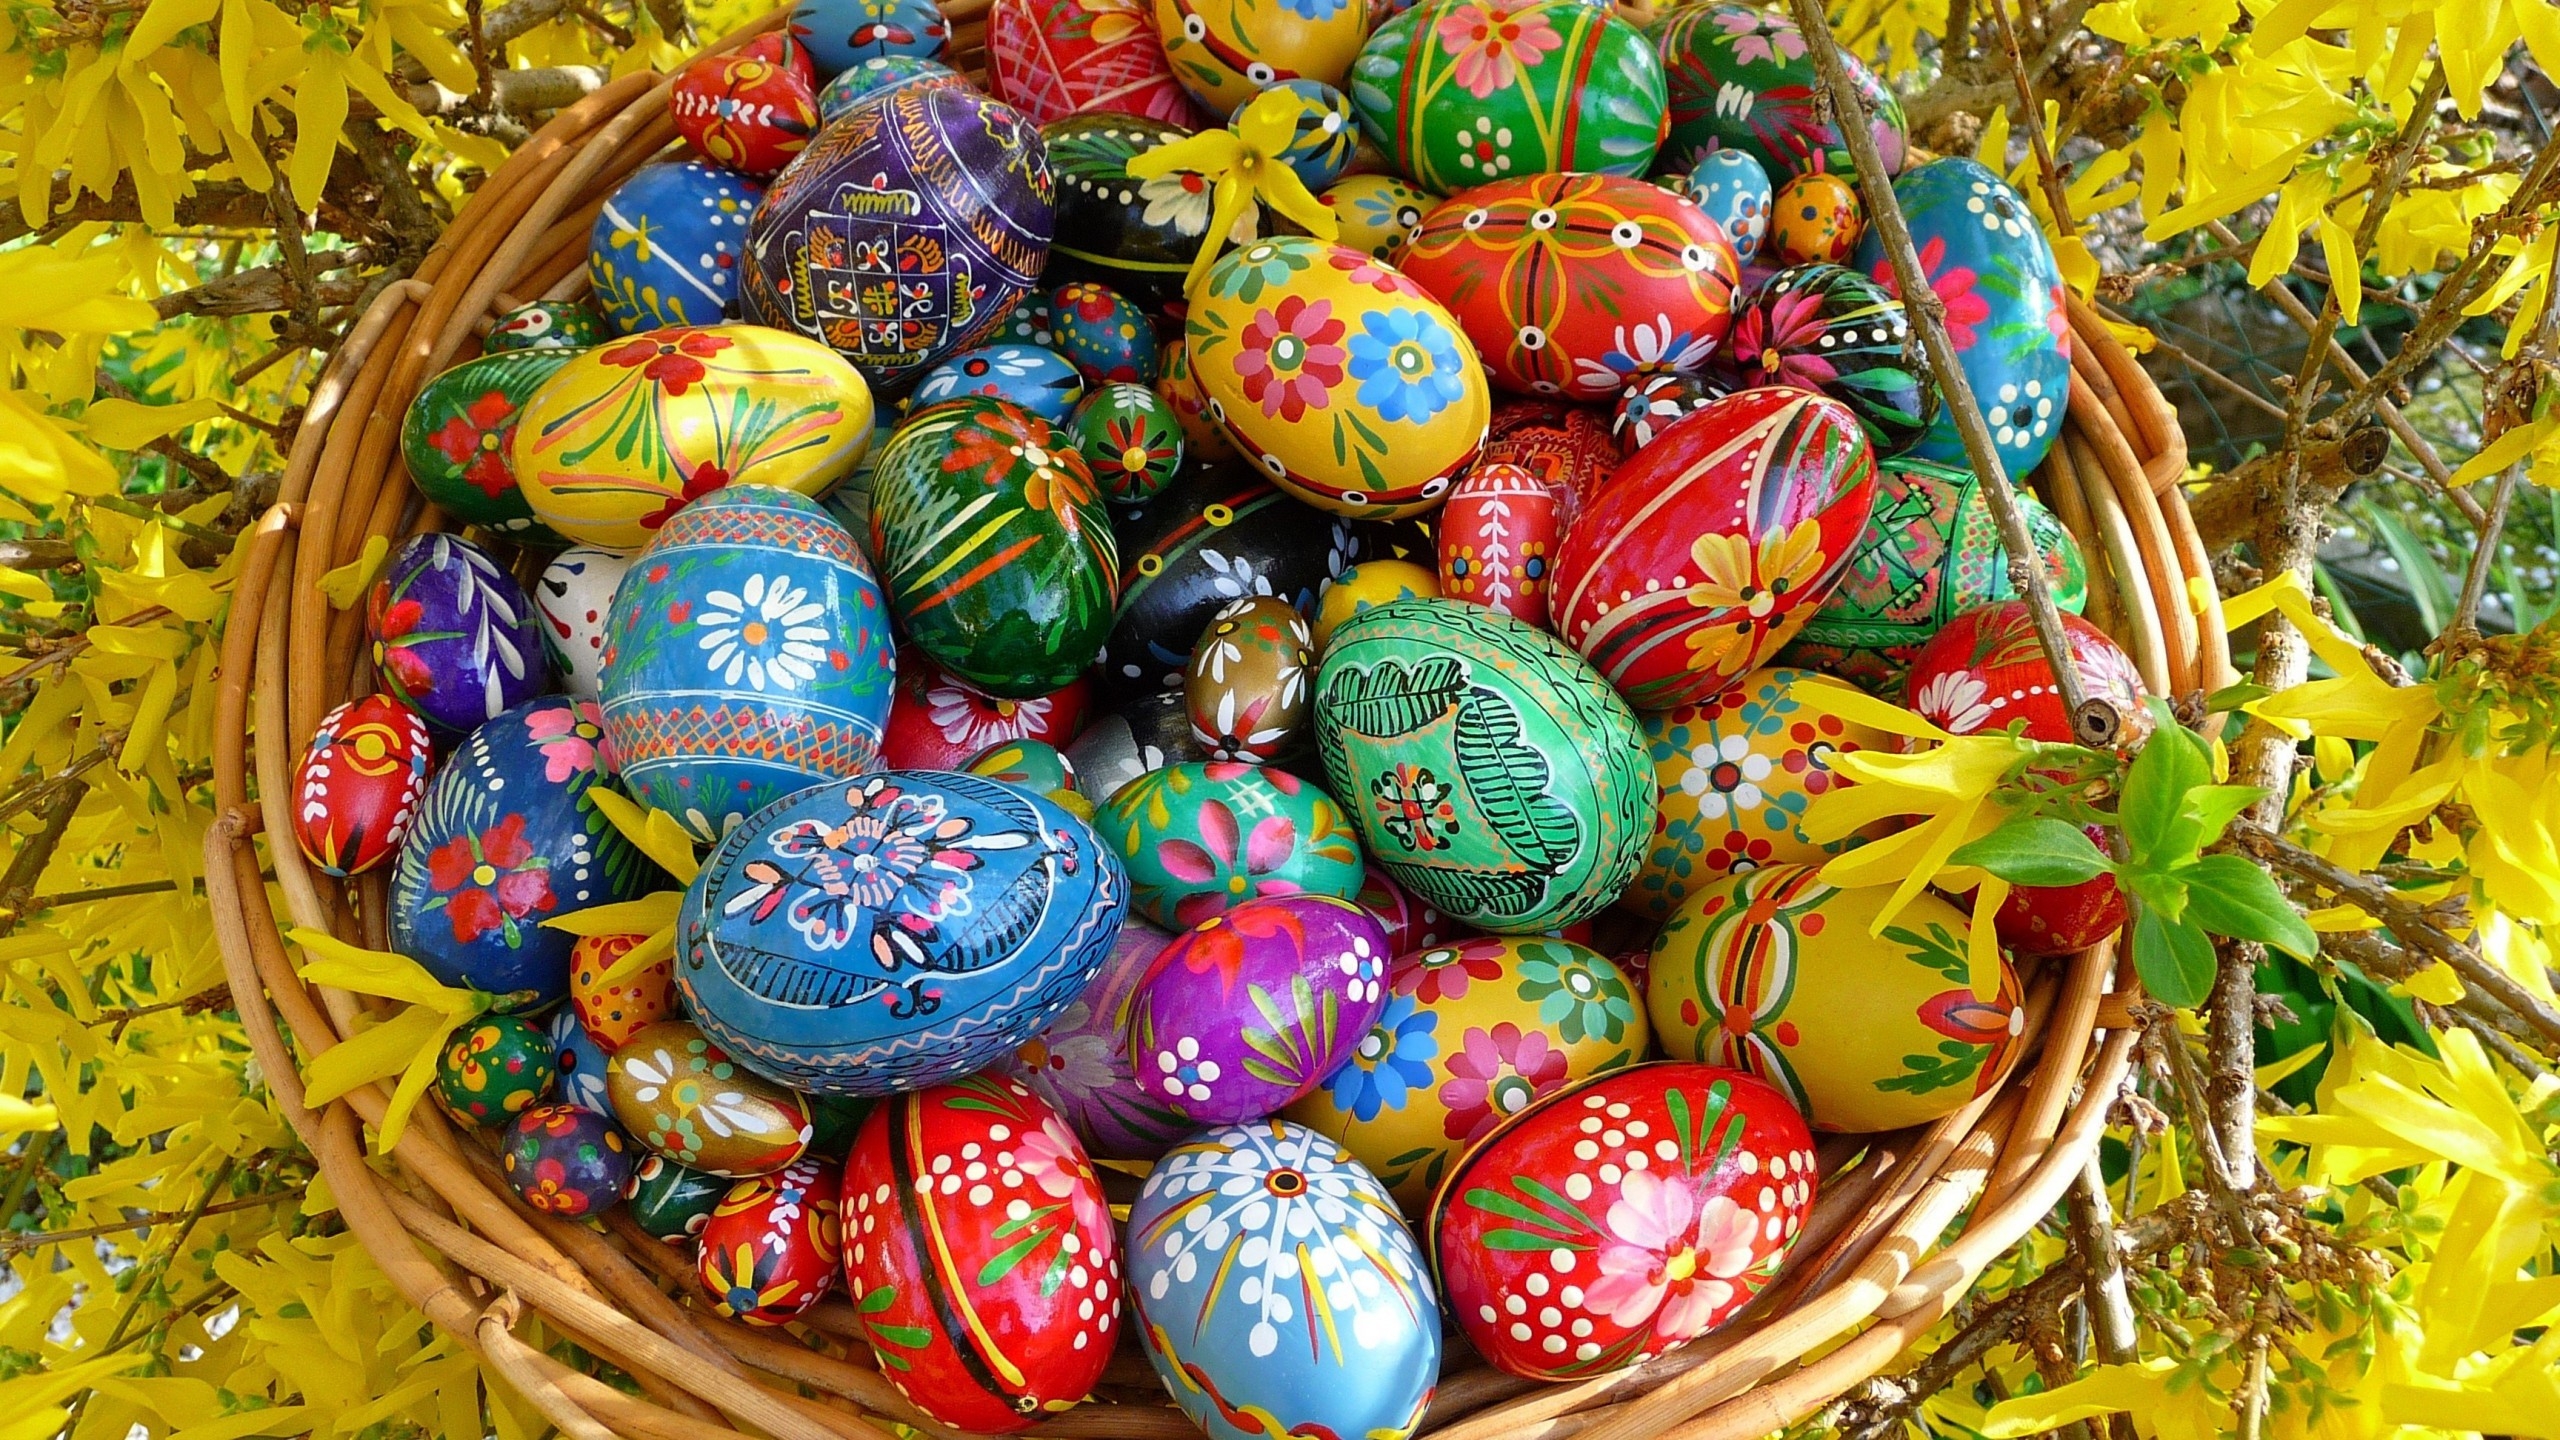 Painted Easter Eggs for 2560x1440 HDTV resolution